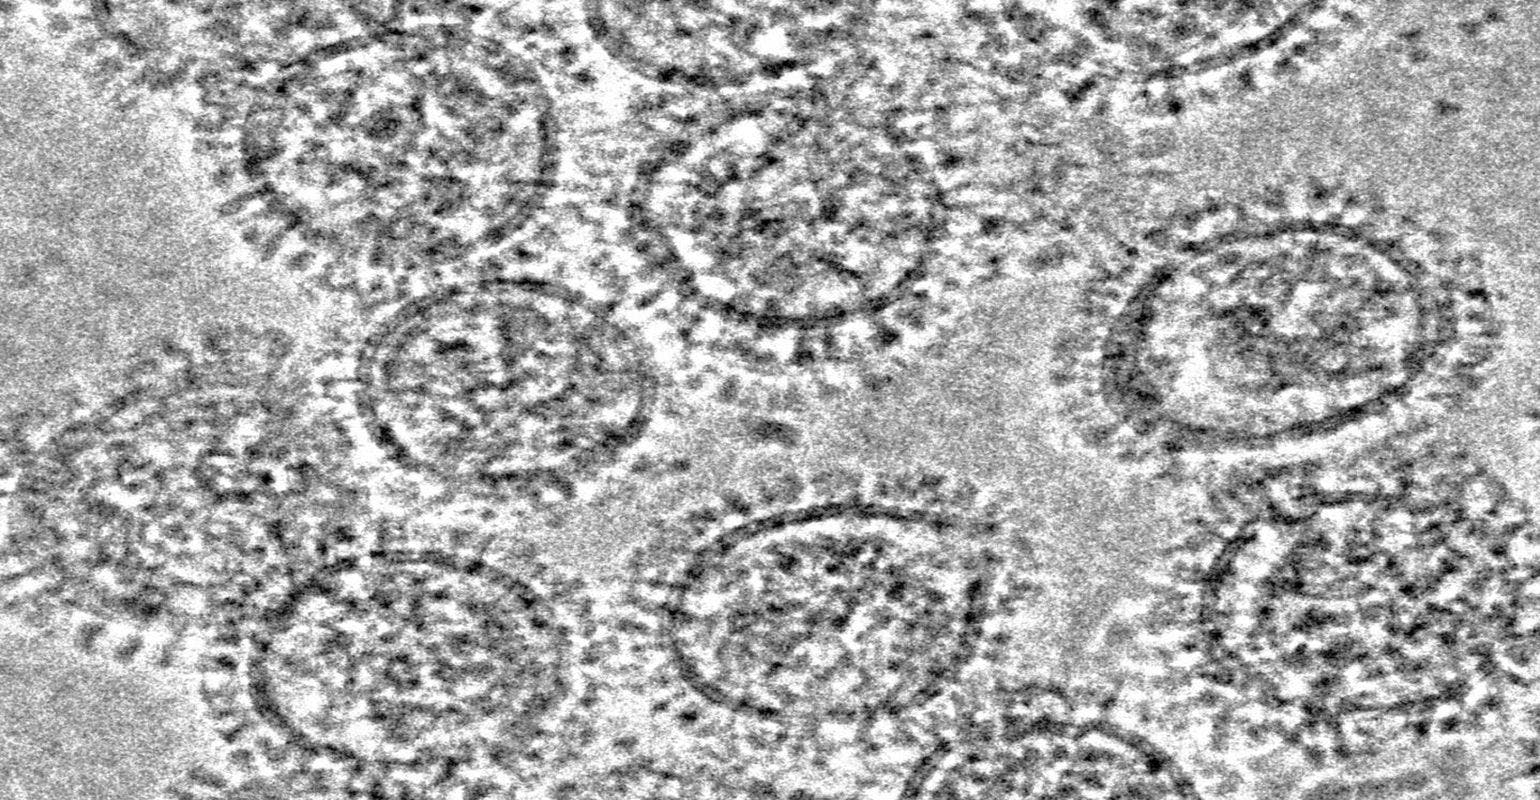 Anti-Flu Antibodies Can Inhibit Two Different Viral Proteins